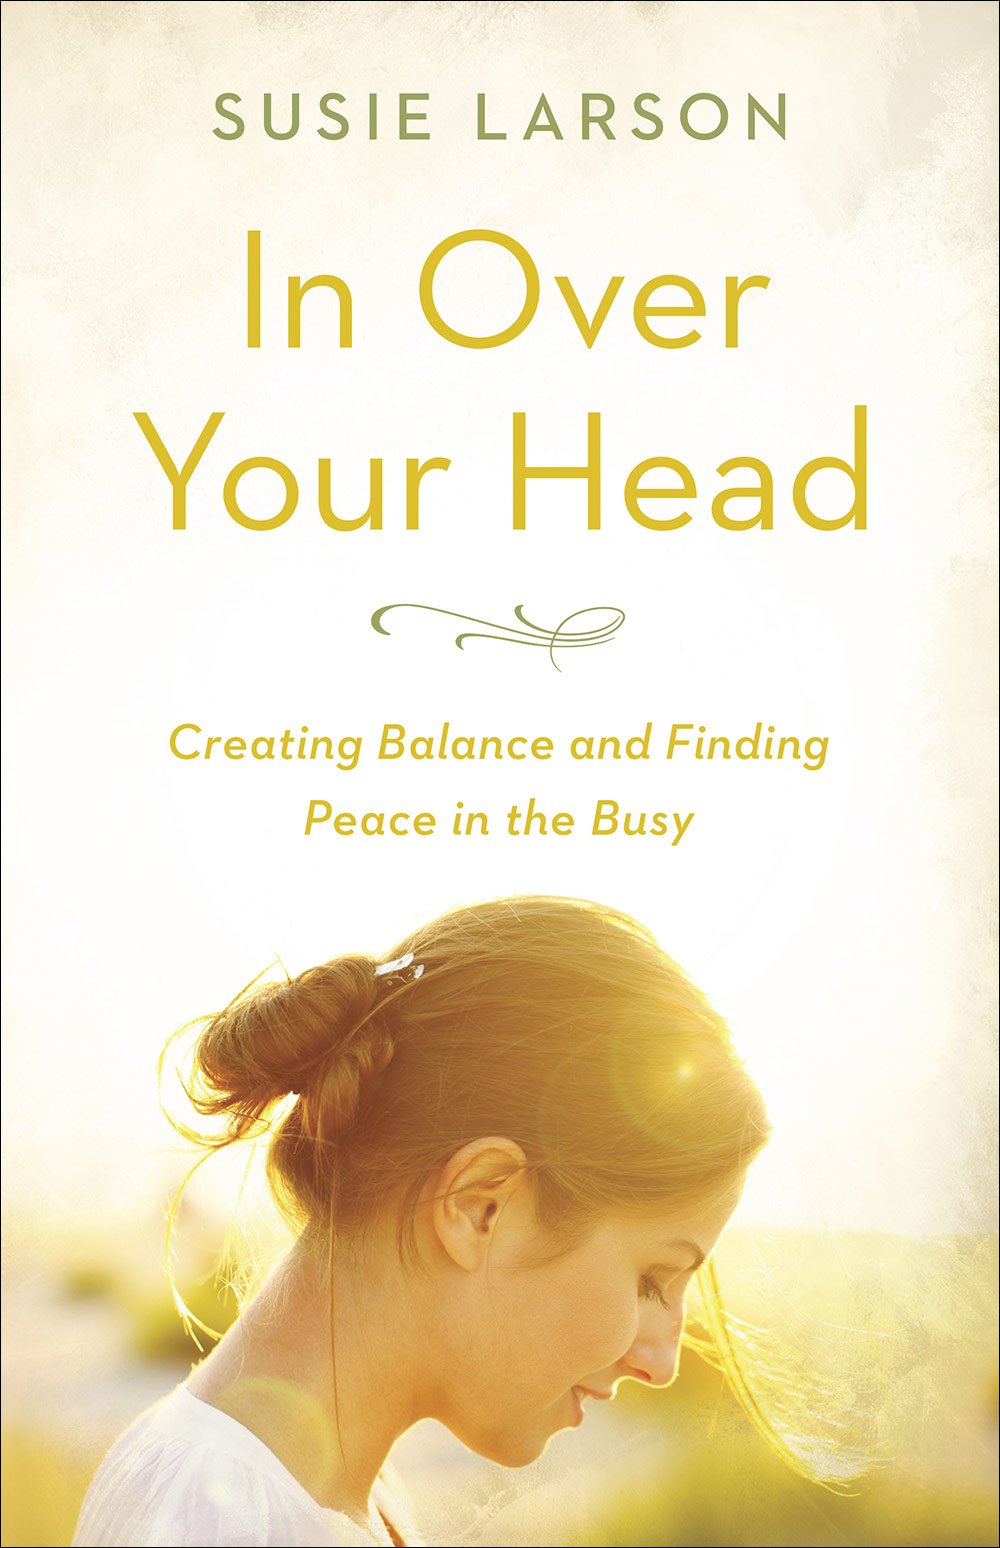 In Over Your Head: Creating Balance and Finding Peace in the Busy (Susie Larson)